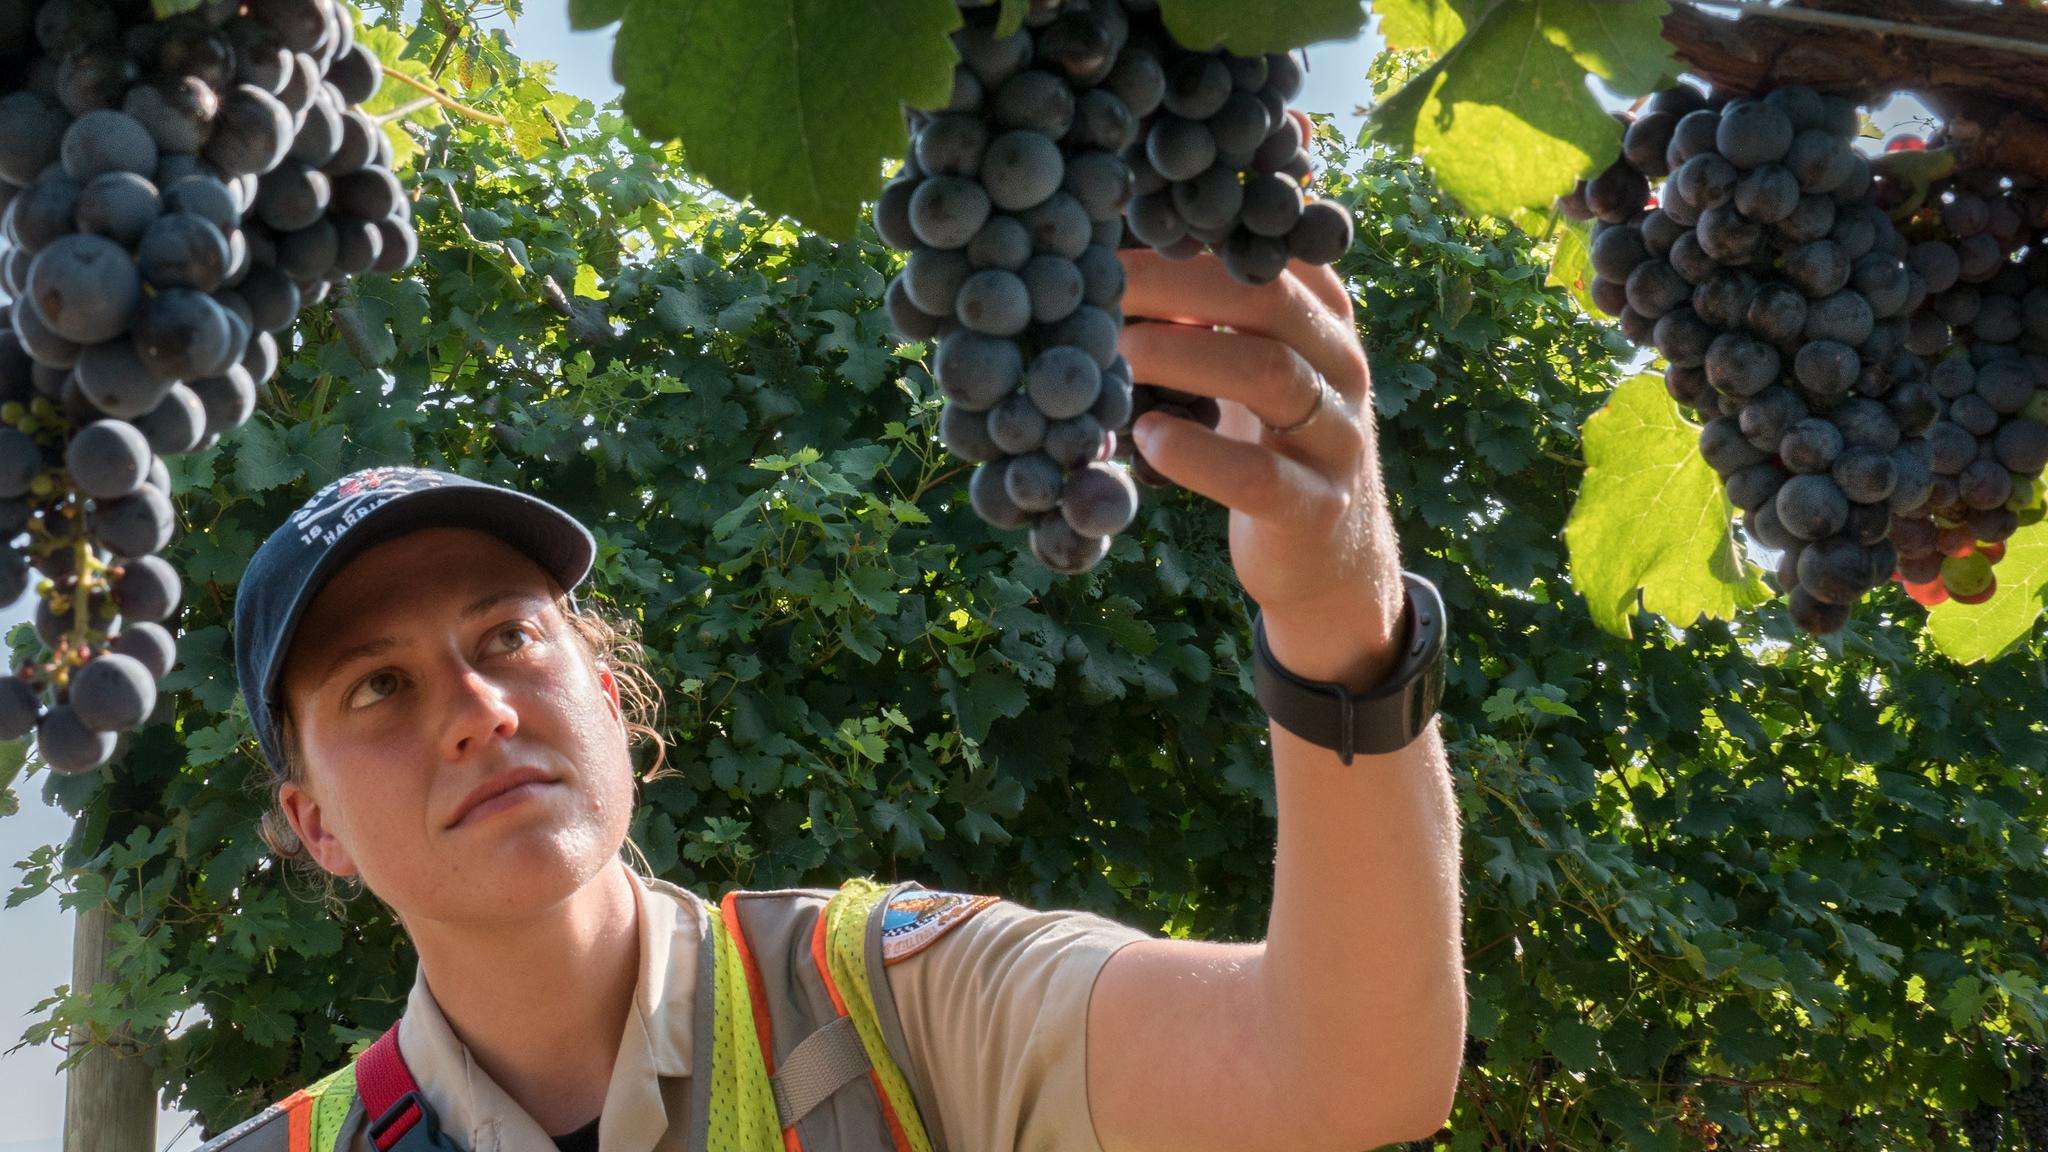 Woman wearing a ball cap and safety vest inspects grapevines for signs of invasive pests.